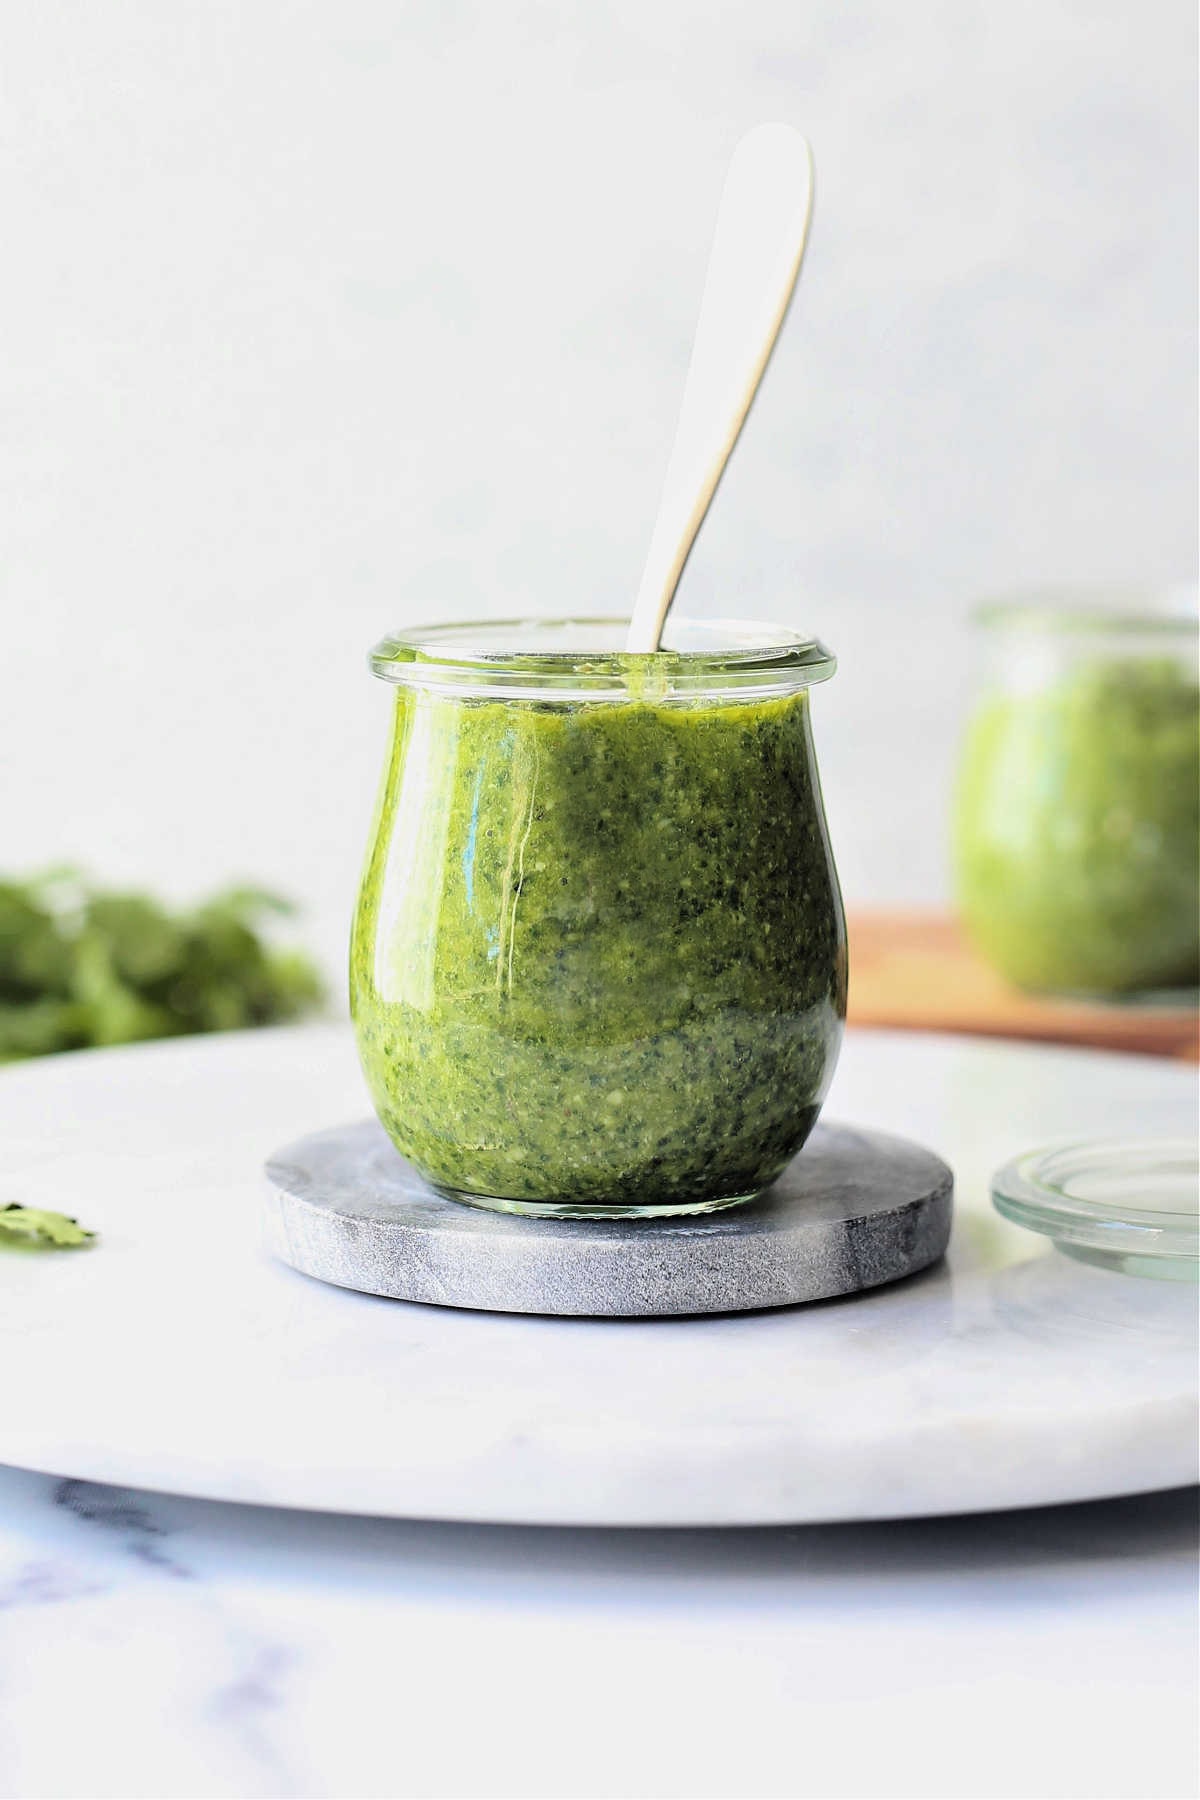 pesto made of cilantro and basil in a jar with a spoon